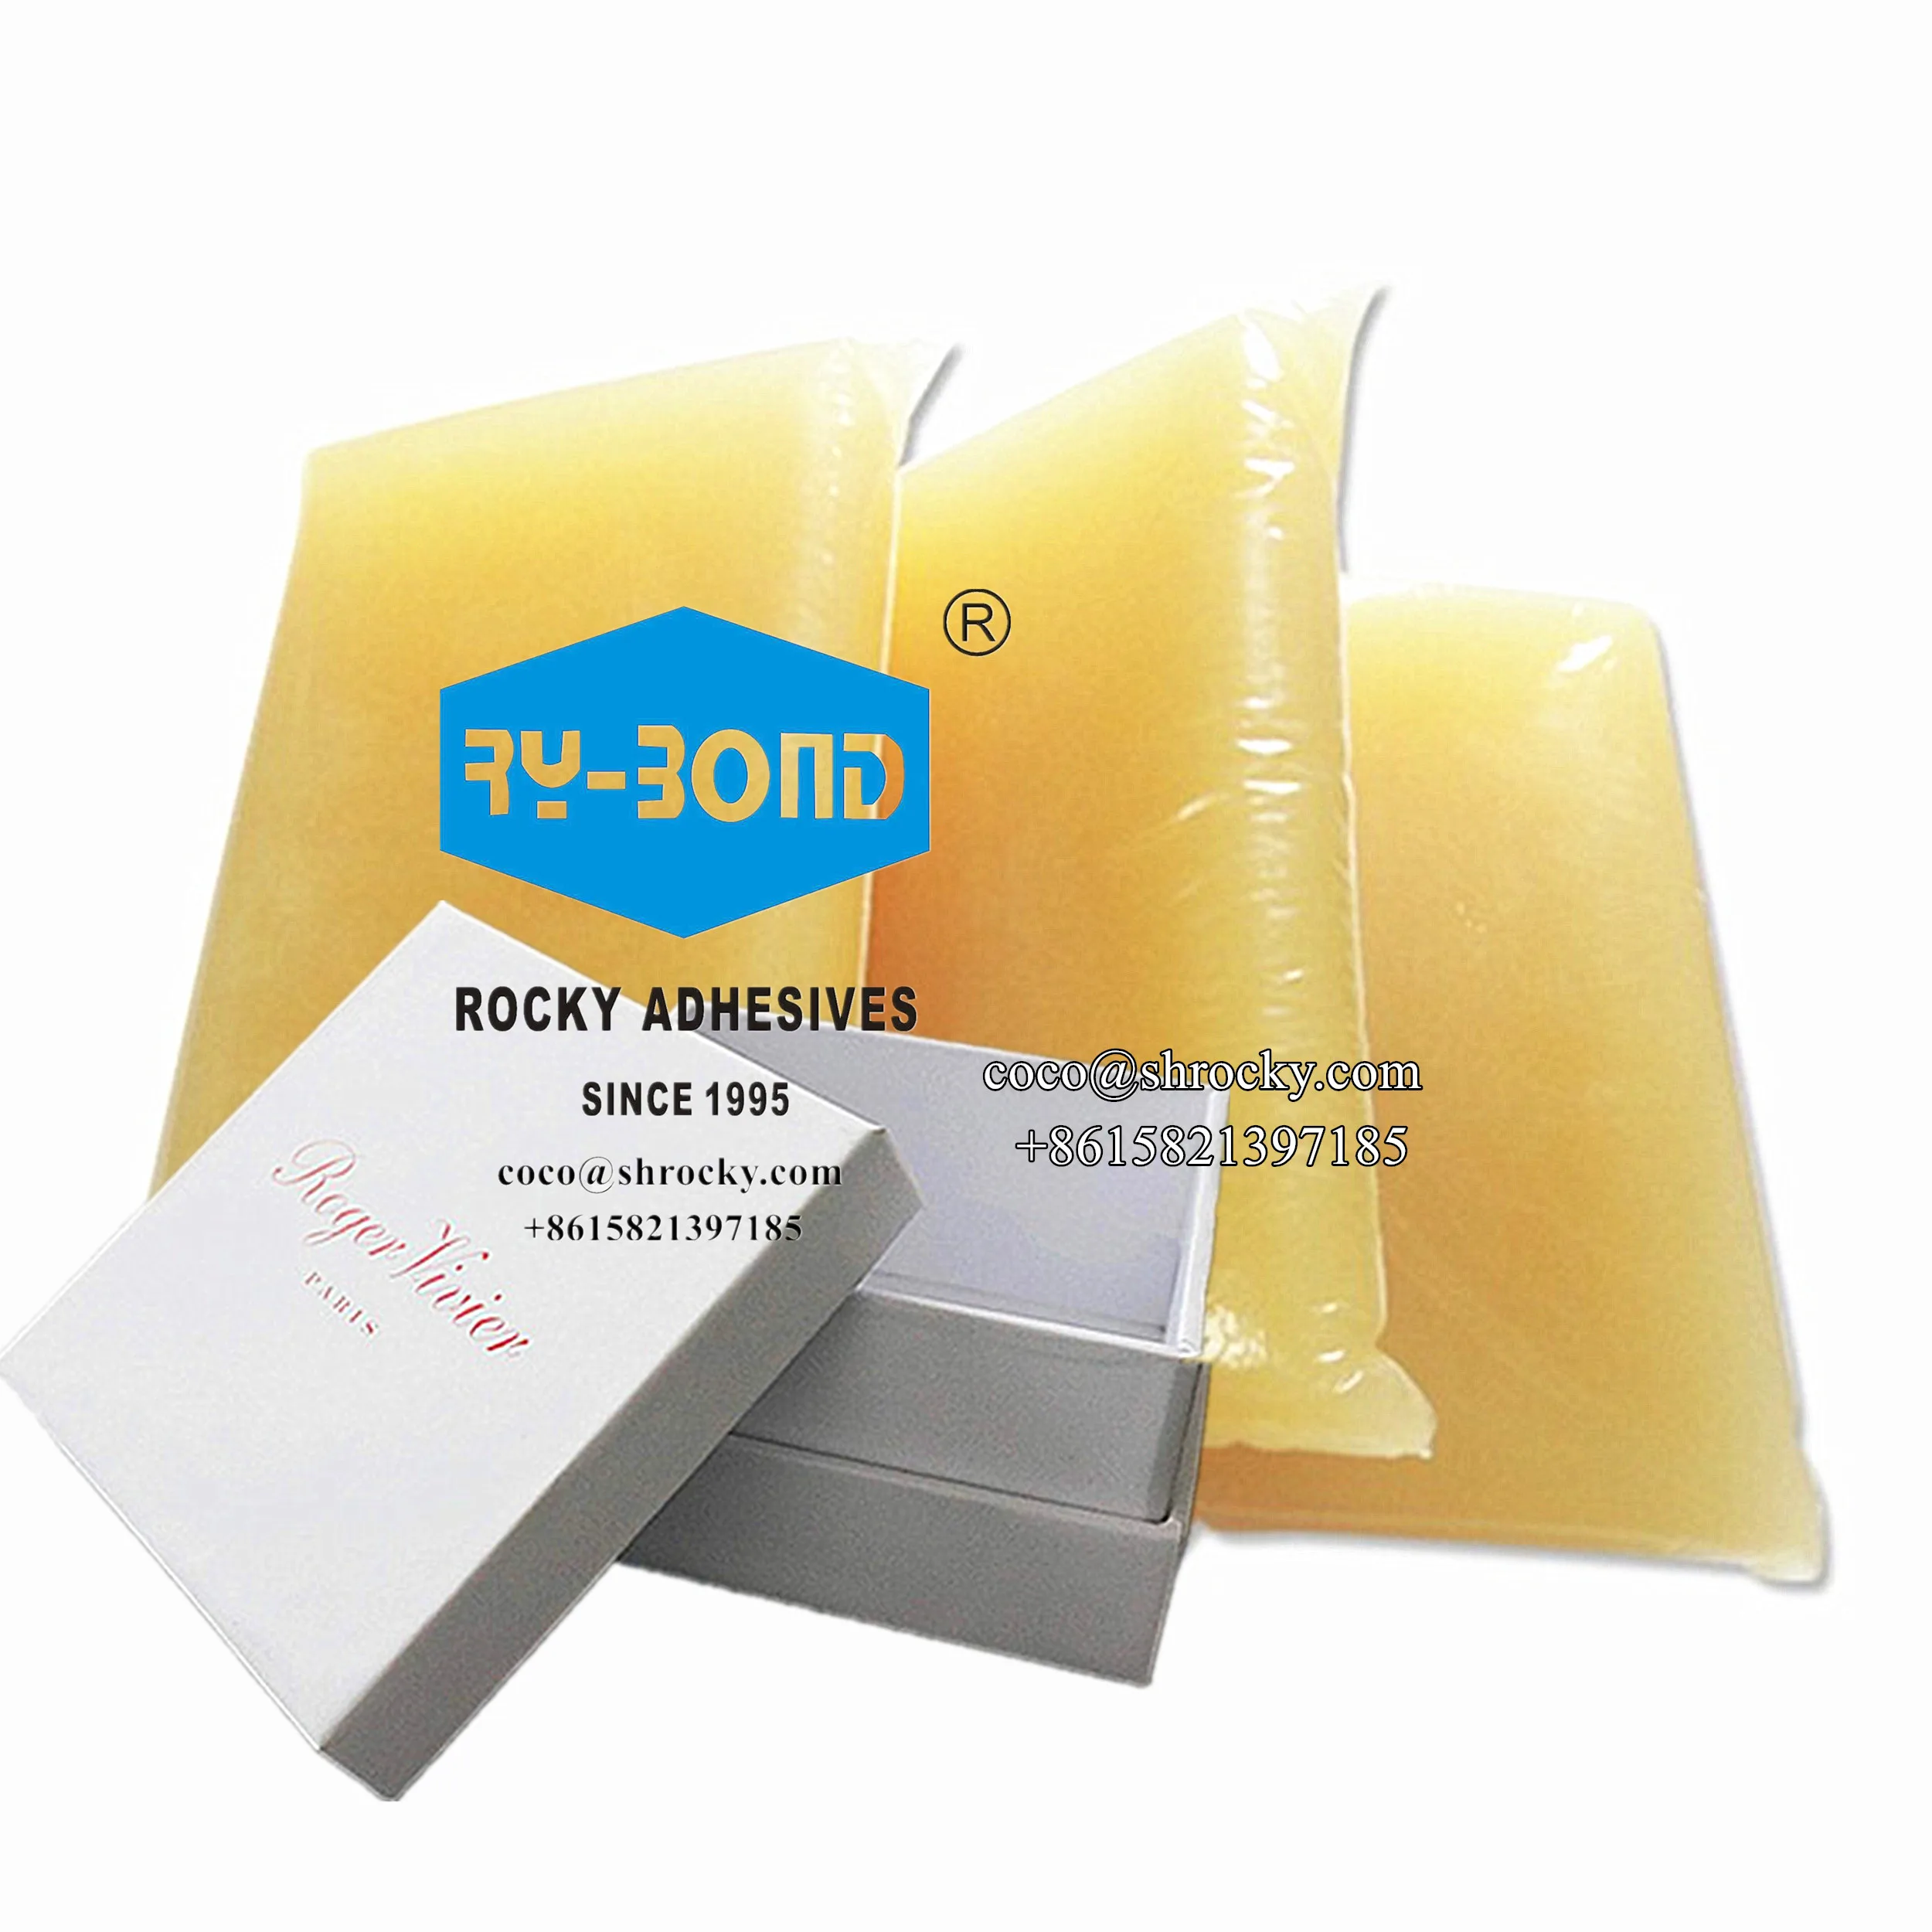 Reliable Manufacturer Book Hot Melt Animal Adhesive Glue For Rigid Phone  Hard Box Jelly Glue - Buy Box Adhesive Glue,Cell Phone Adhesive Glue,Jelly  Glue Product on 